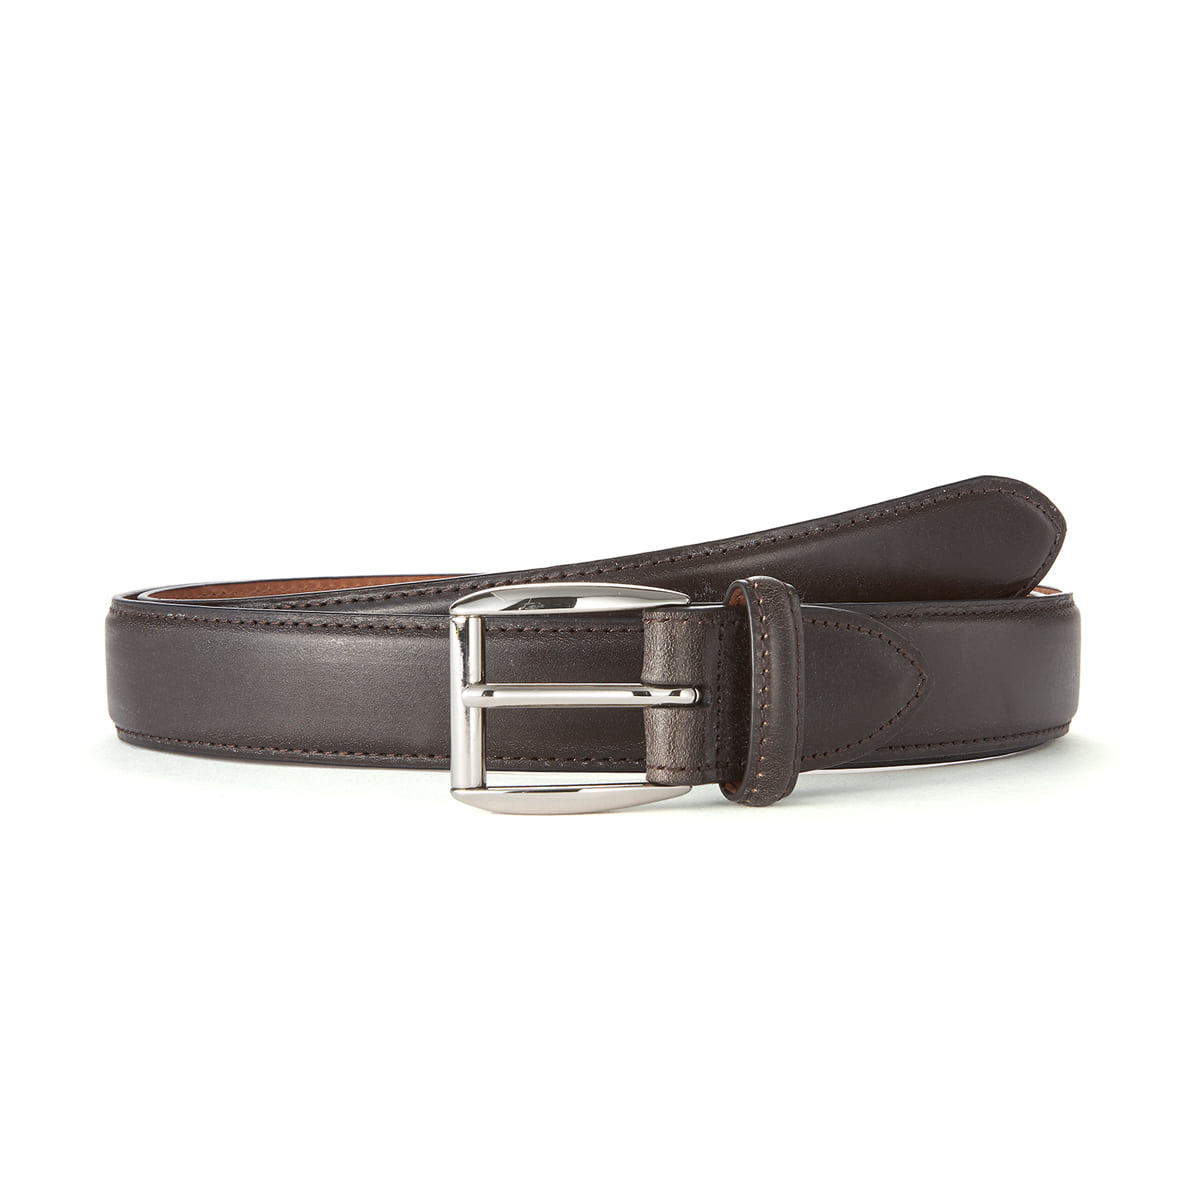 Dk brown Bridle Leather (Silver Buckle)